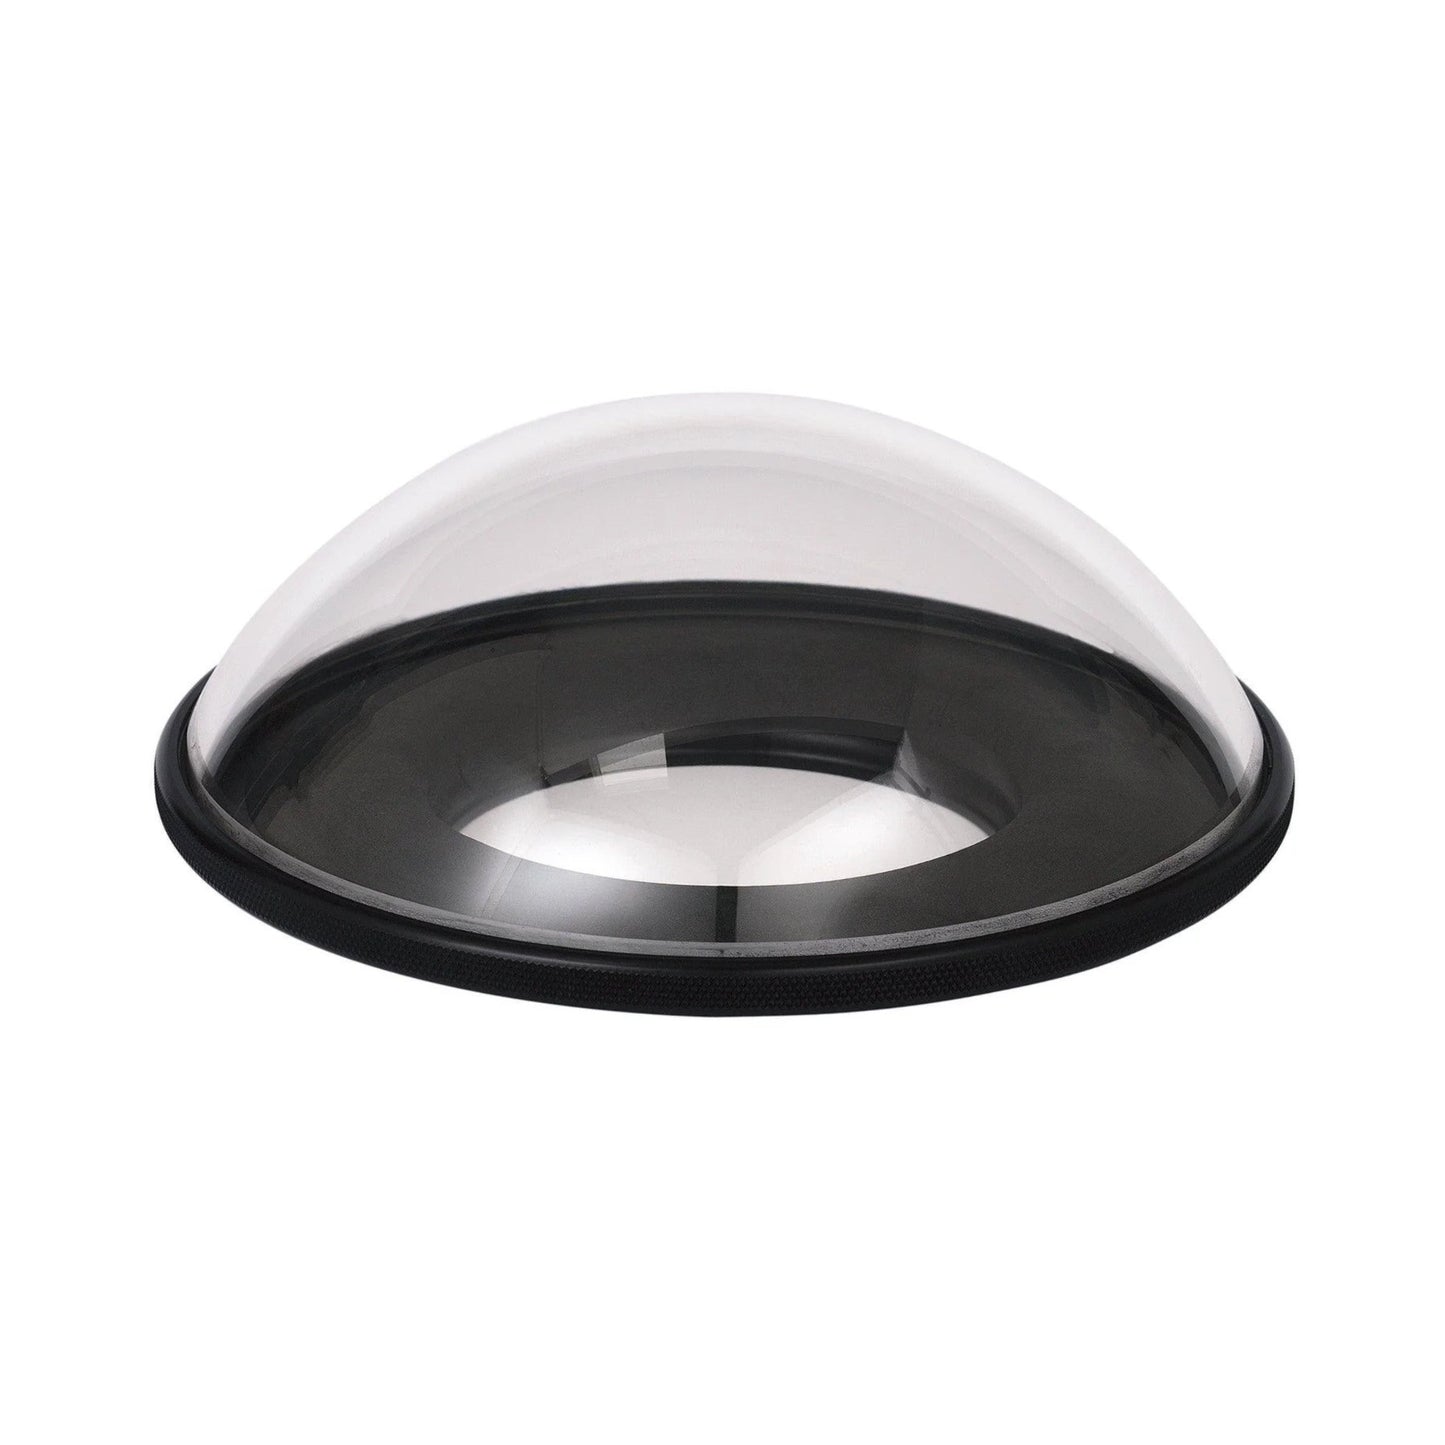 AquaTech LP-3 8" Dome Port for Wide-Angle and Fisheye Lenses